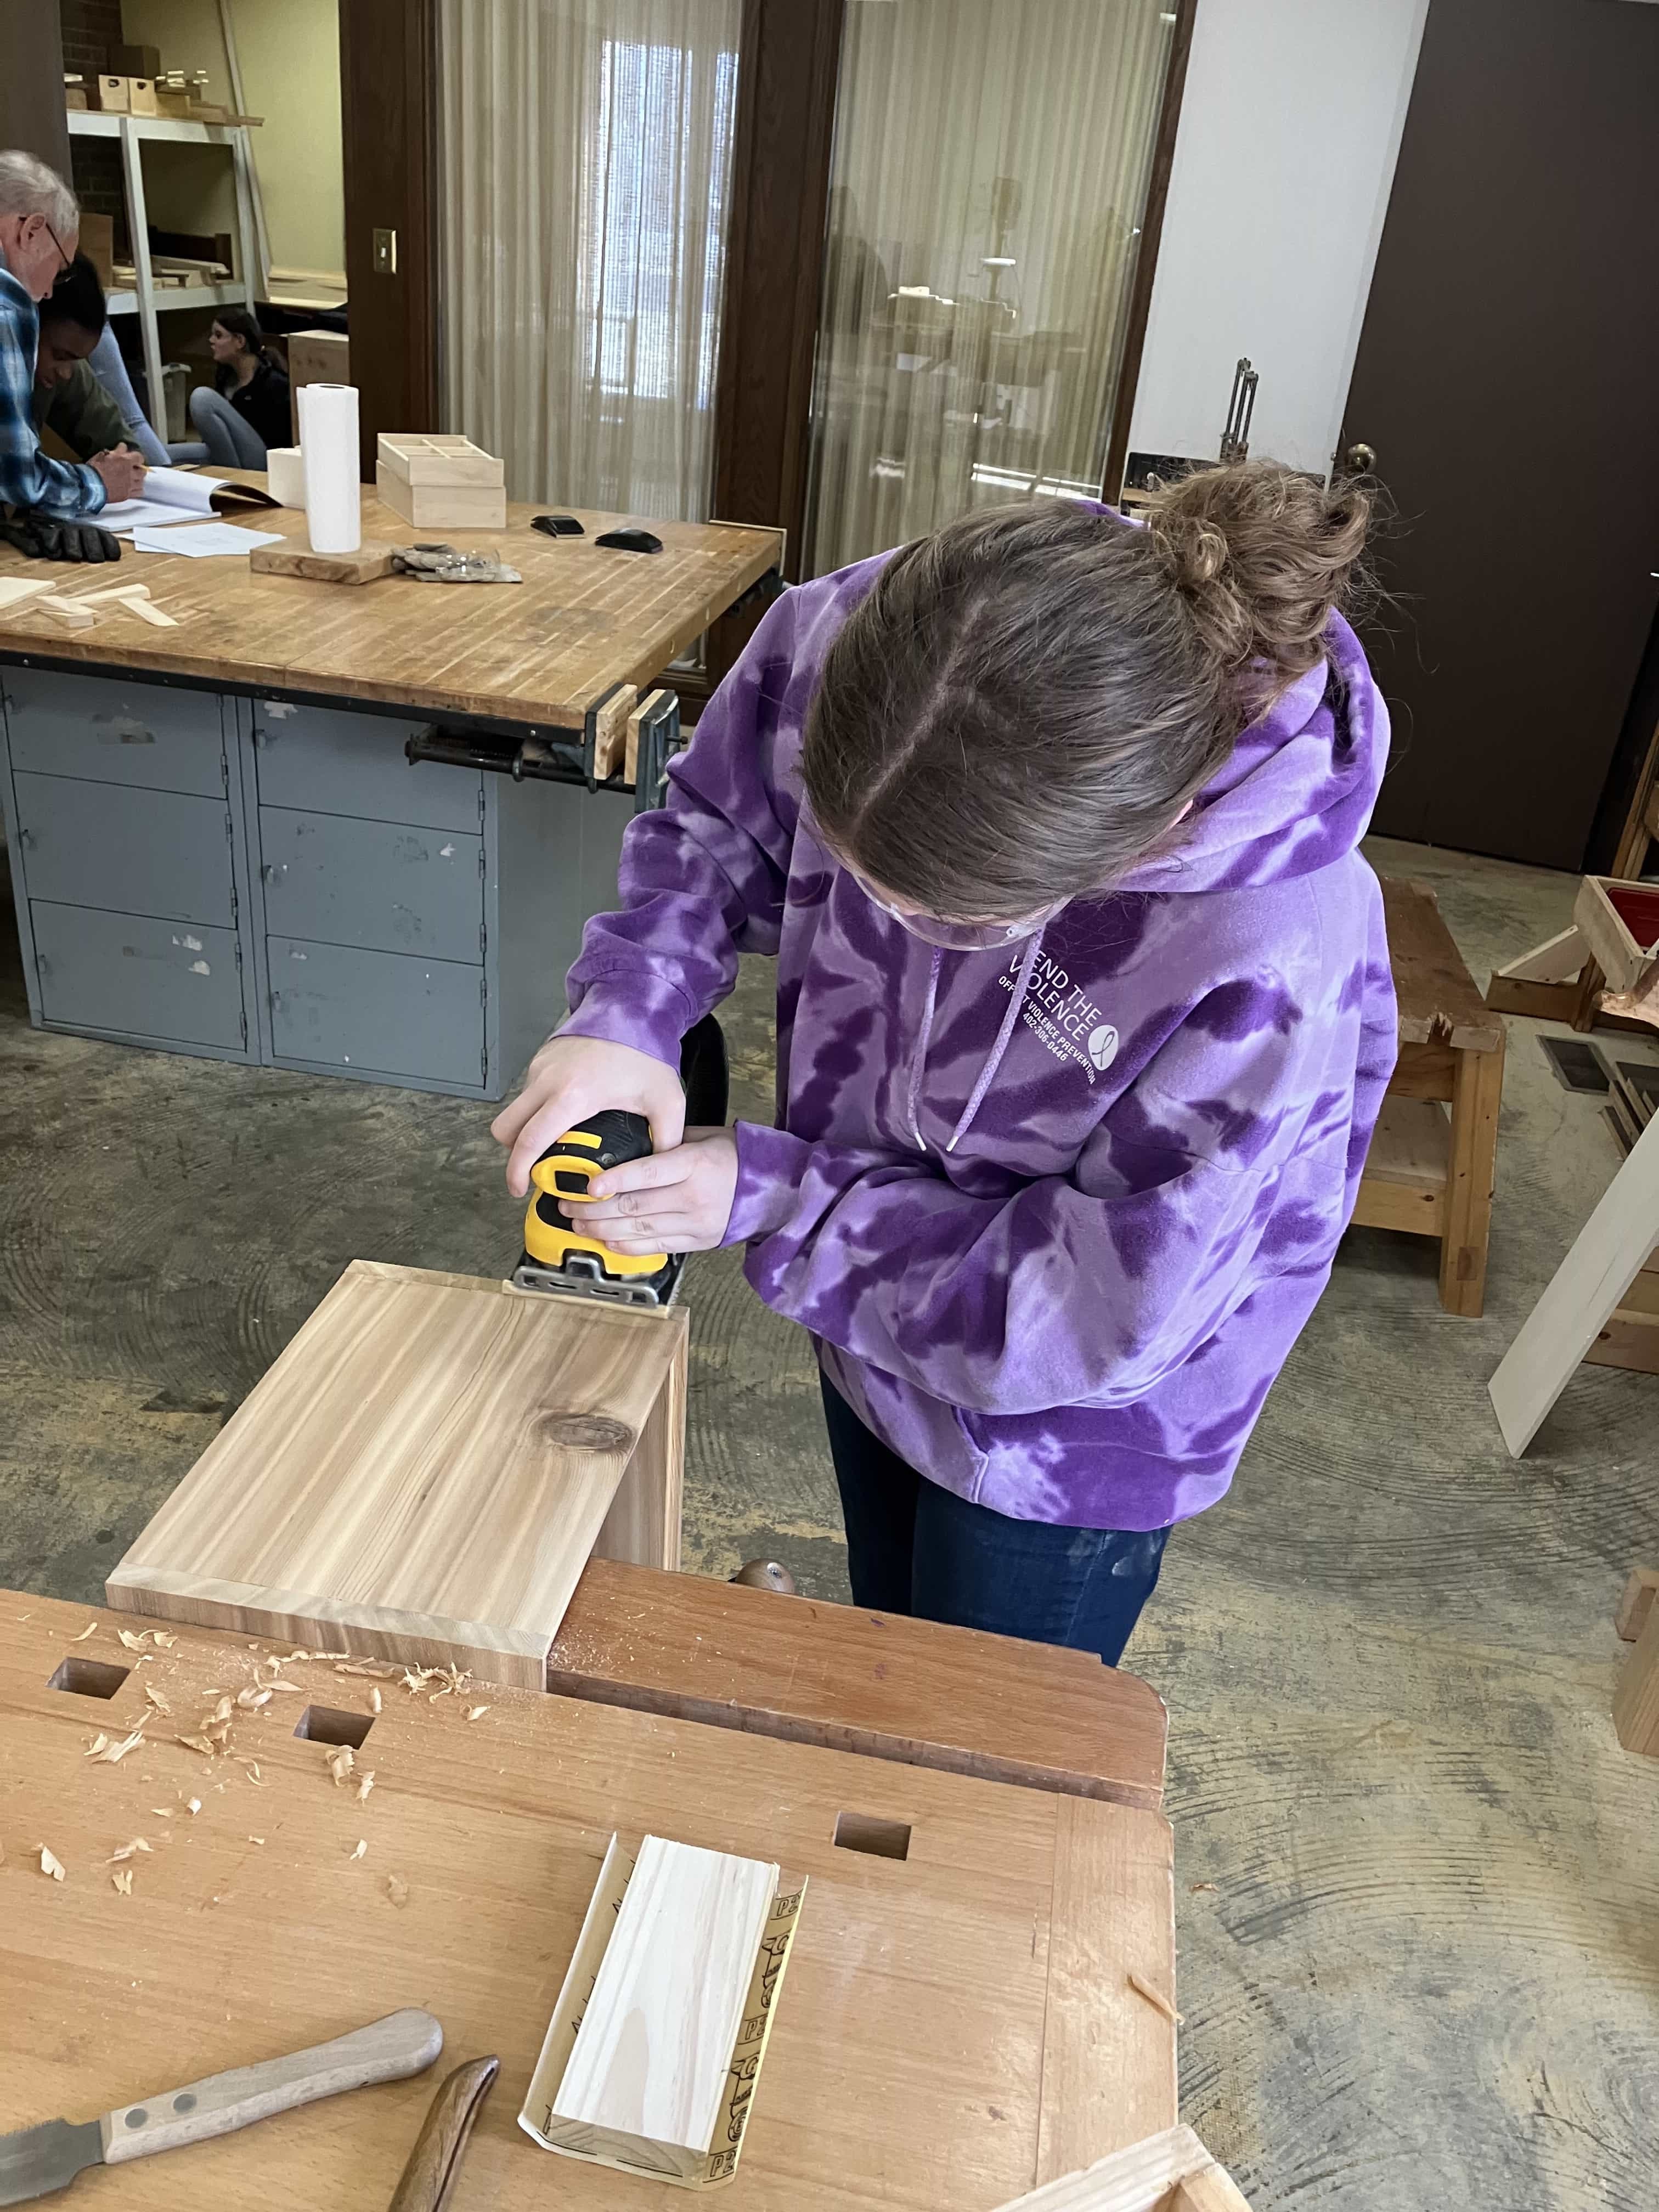 Woodworking for 4-H